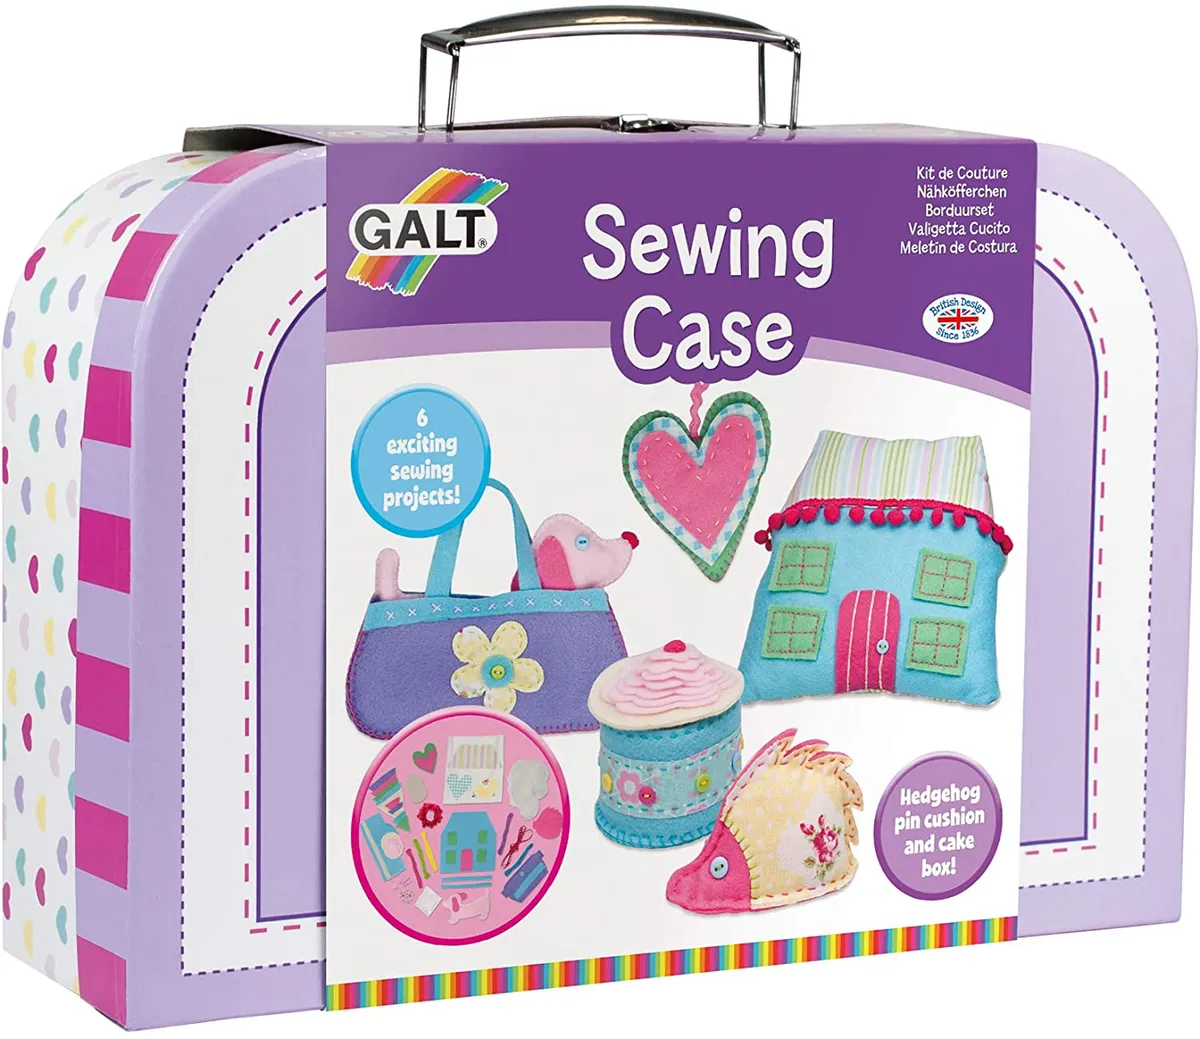 Maker Gifts - Fashion Design and Sewing Kits For Kids - No Time